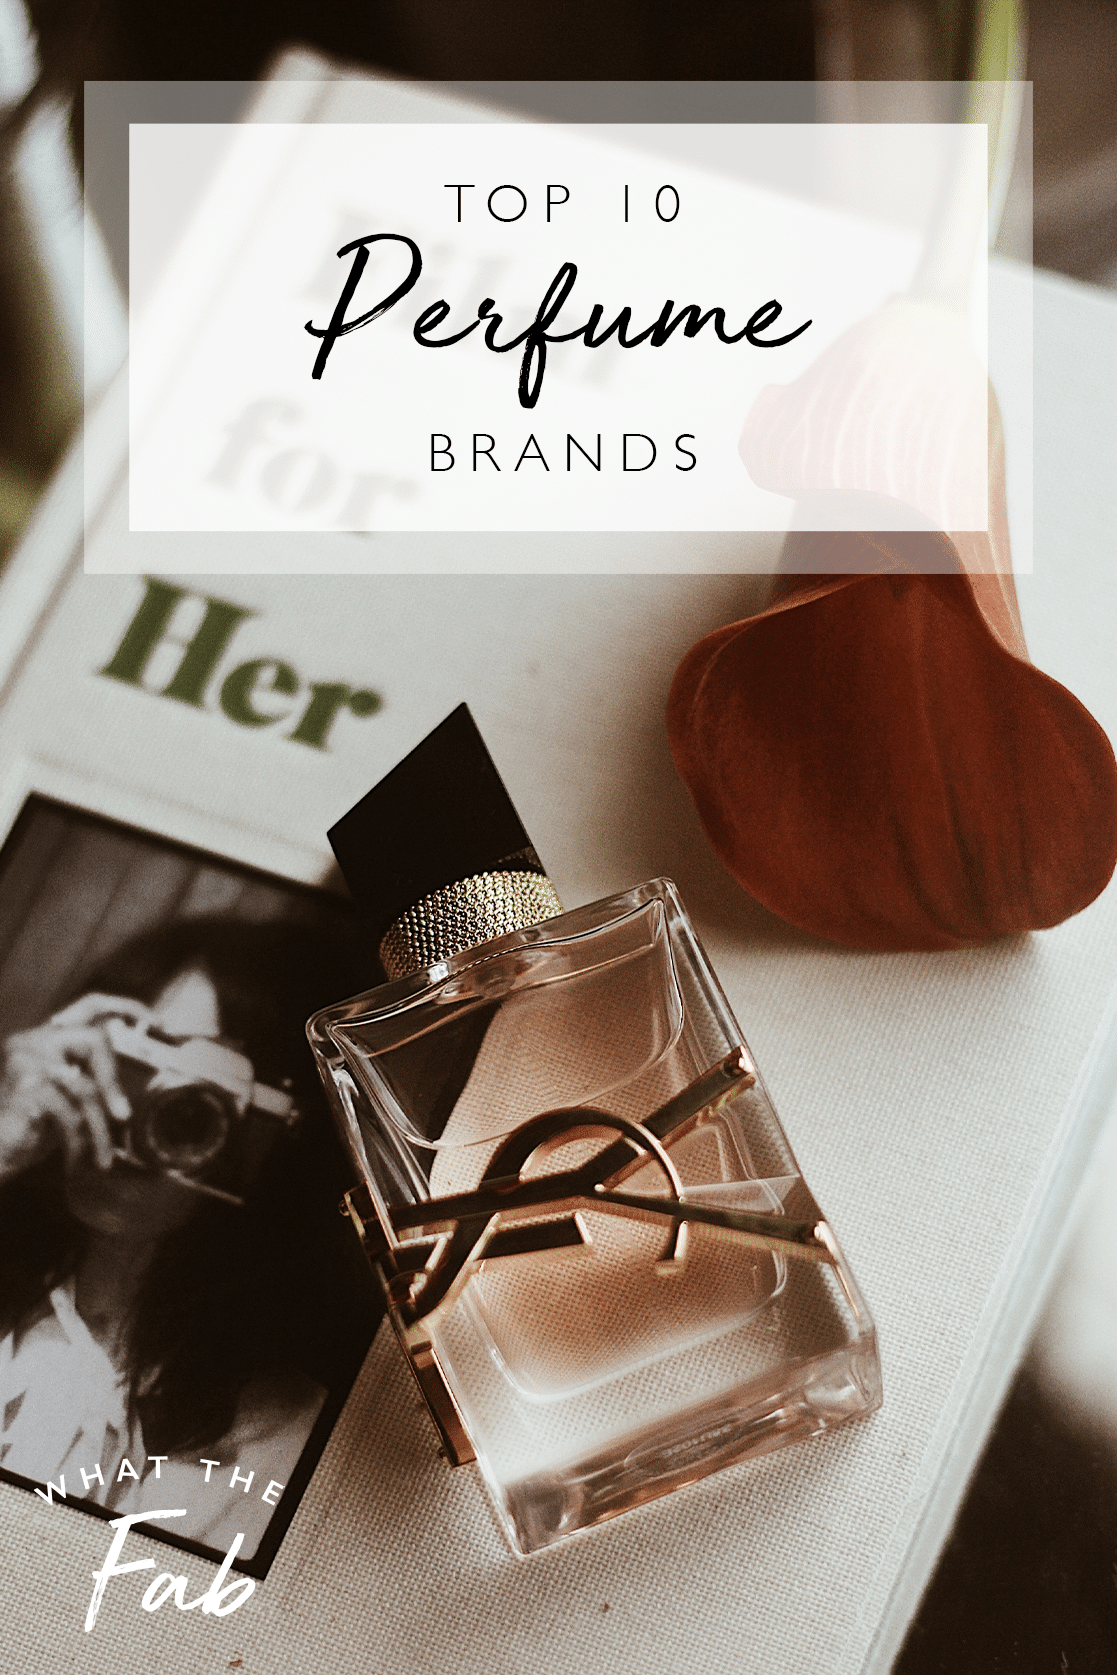 Top 10 Perfume Brands, by Blogger What The Fab